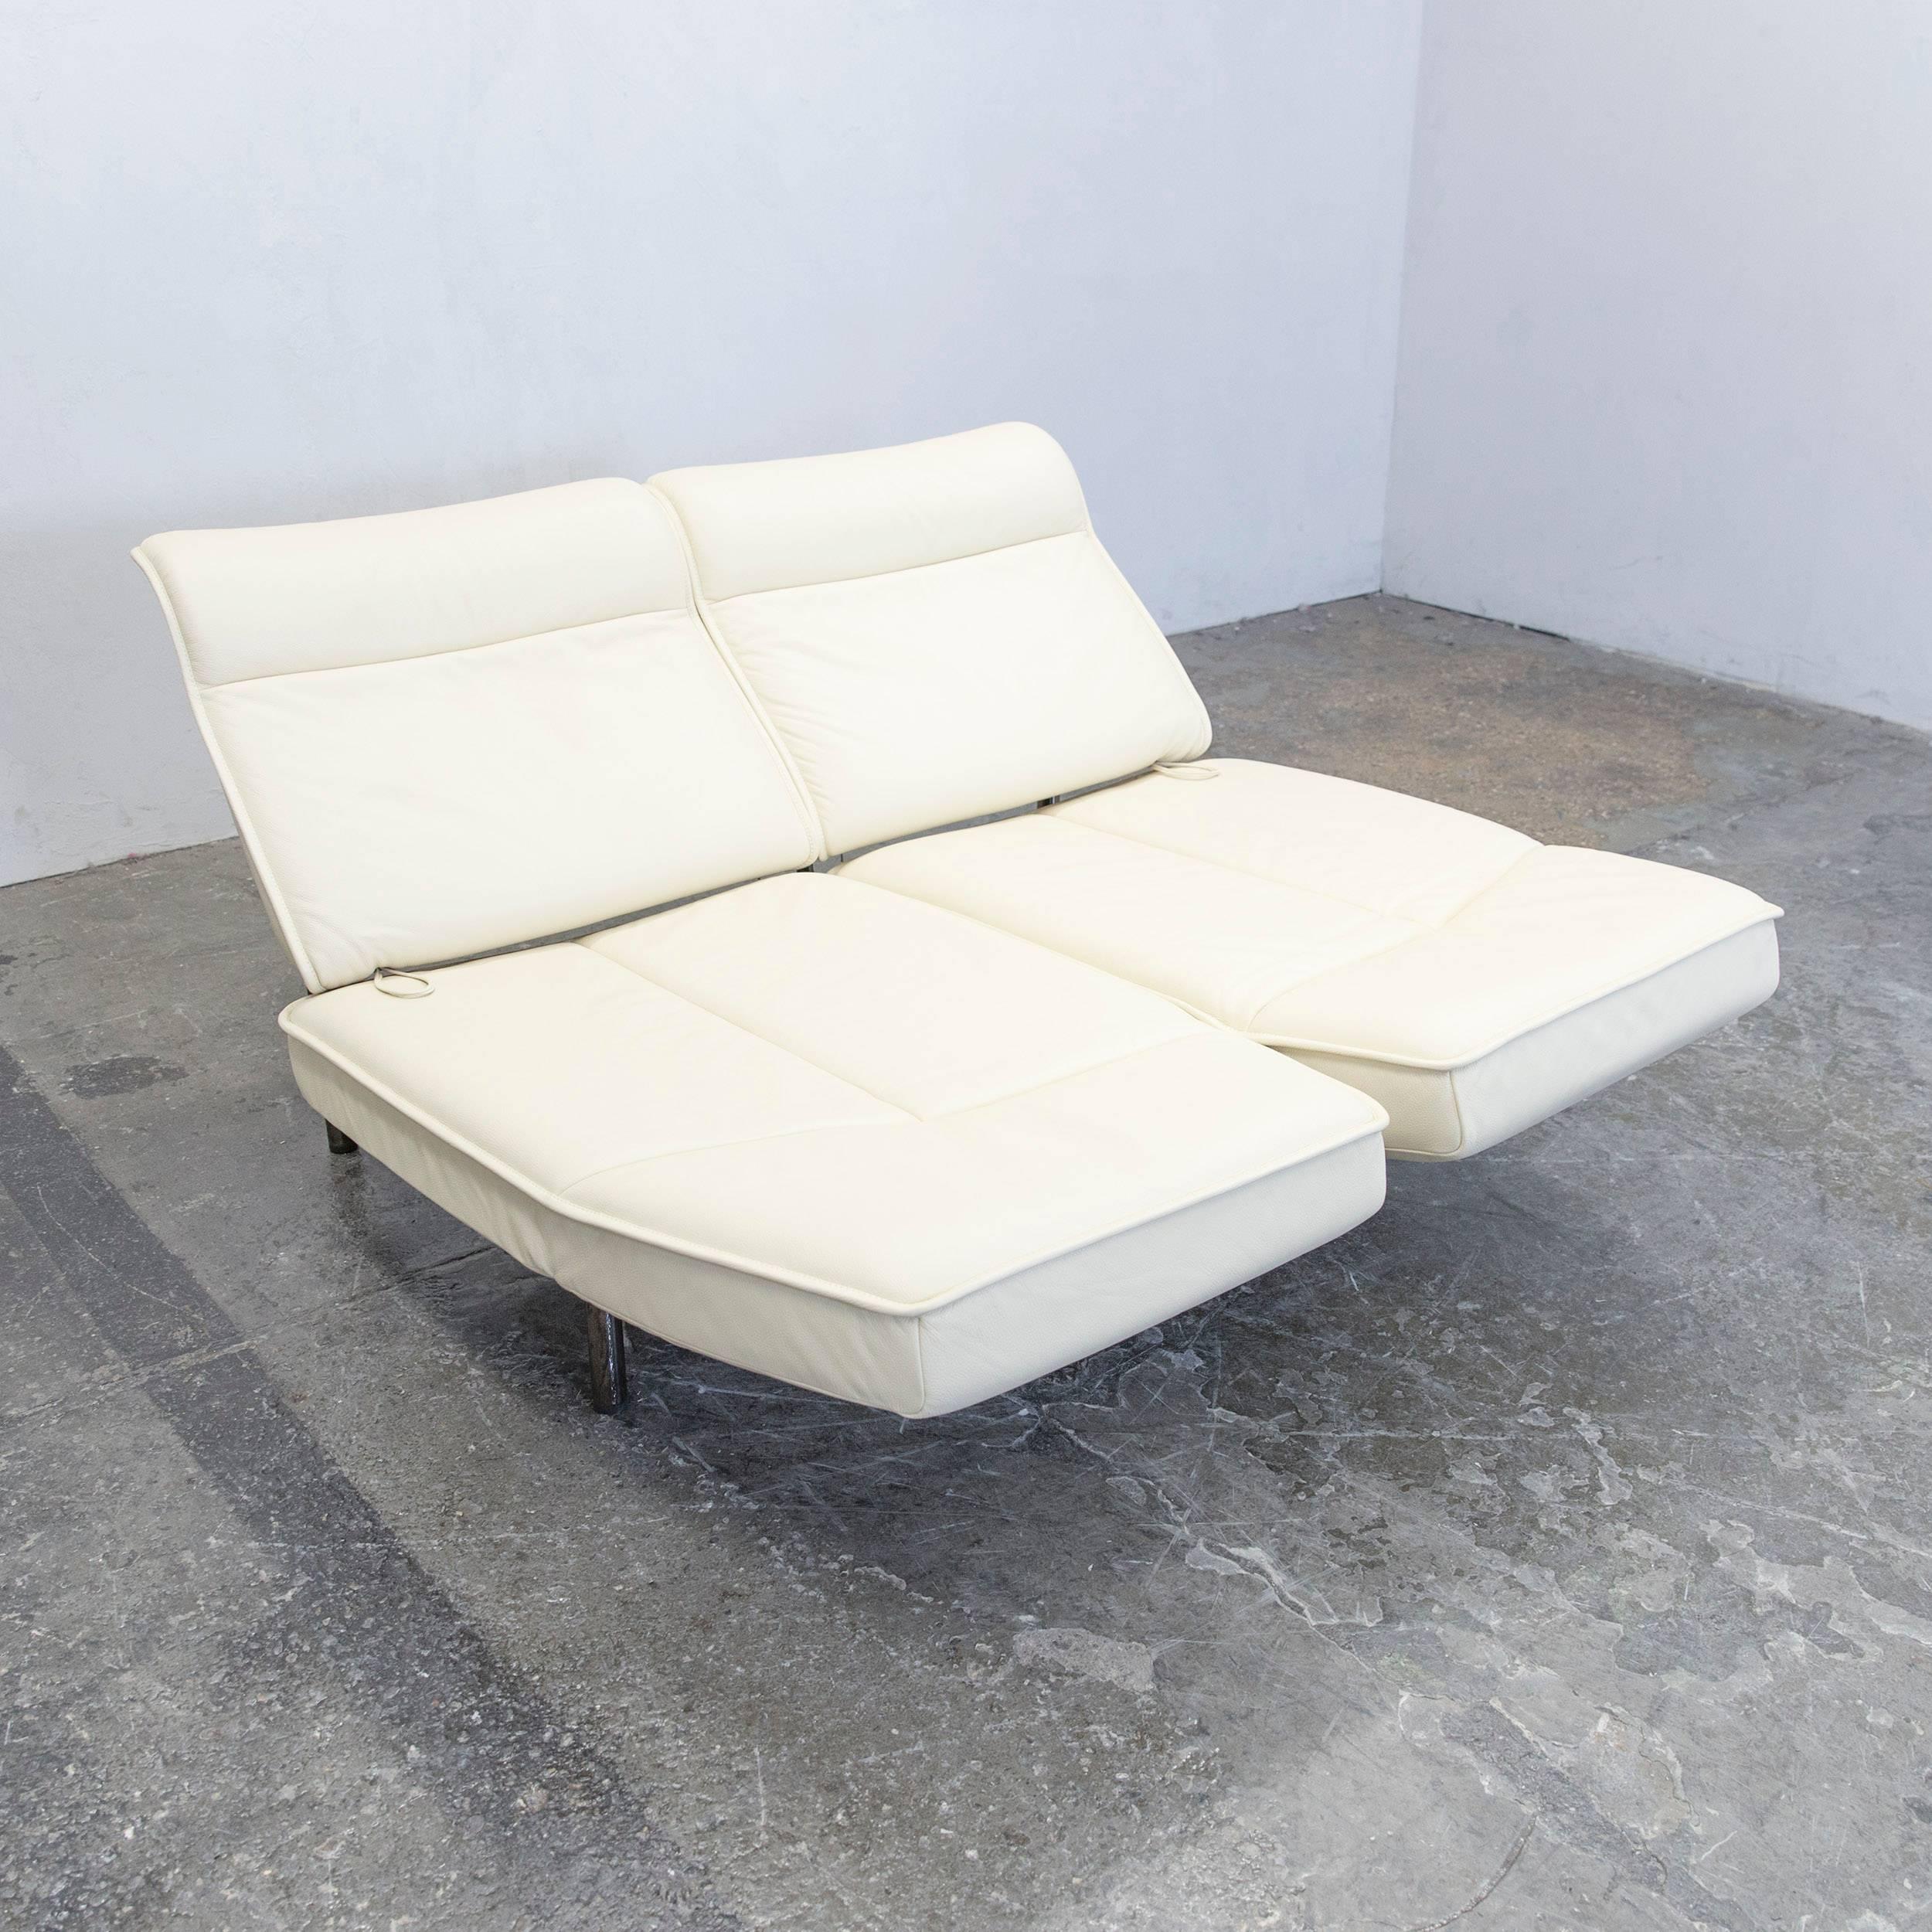 De Sede DS 450 Designer Leather Sofa Creme Relax Function Two-Seat Modern In Good Condition For Sale In Cologne, DE